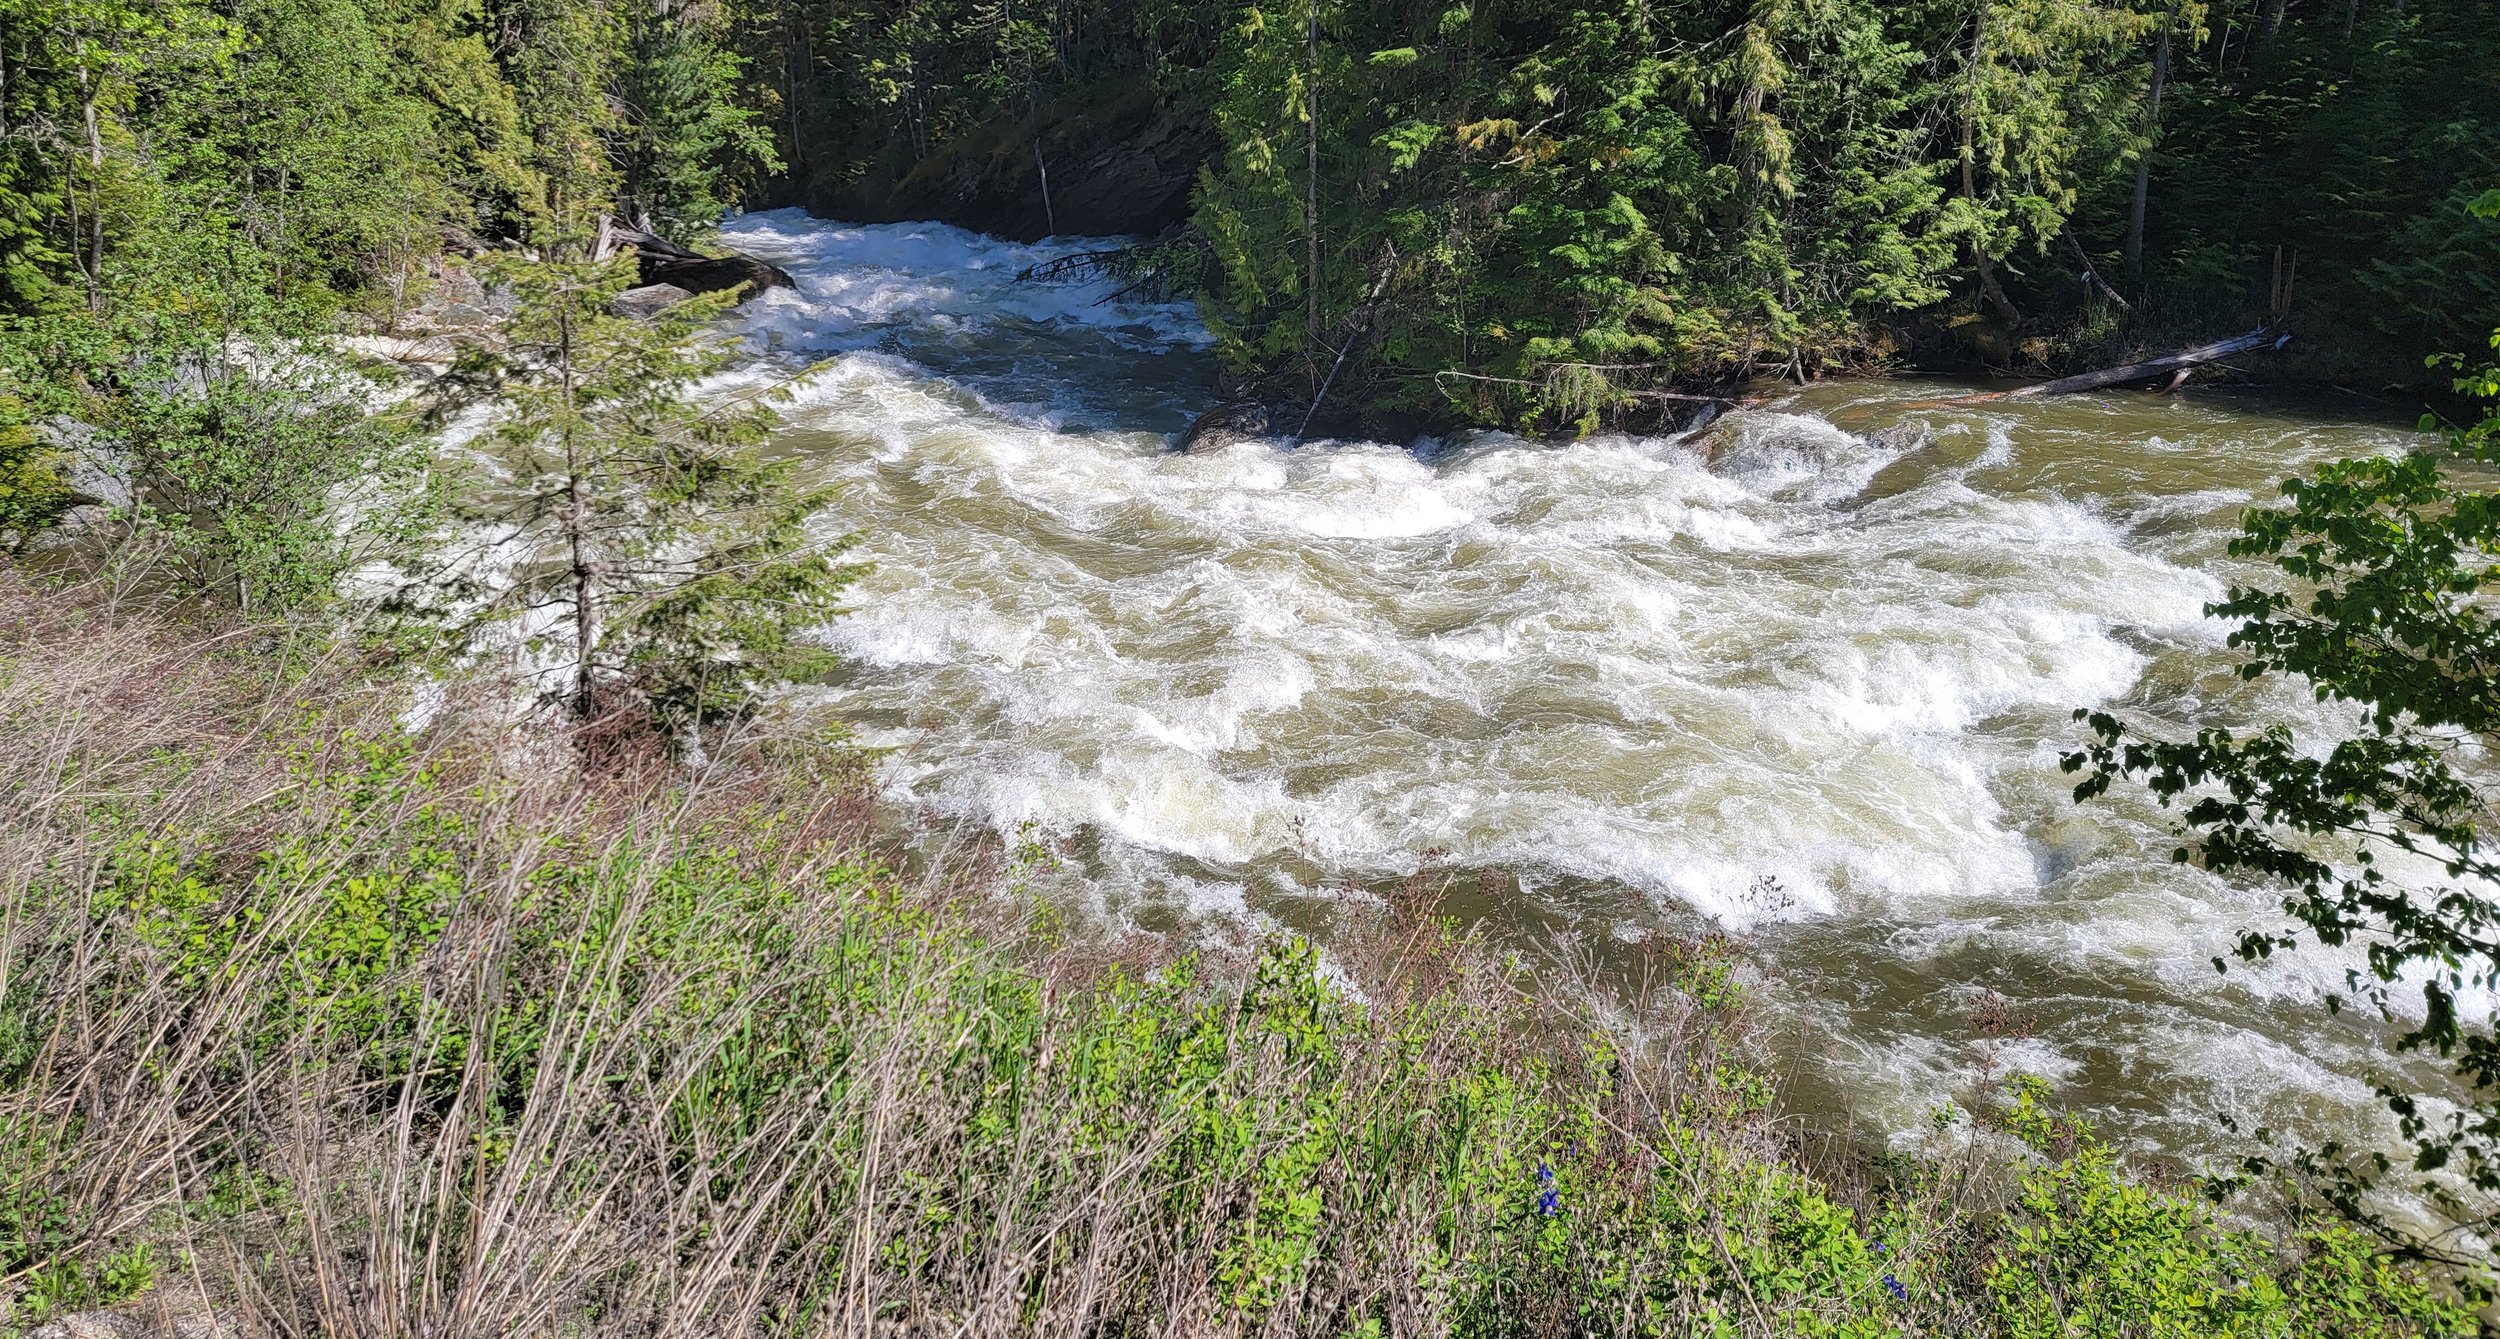 Hey look, a river.  Is this one called "Kootenay" river by chance? 